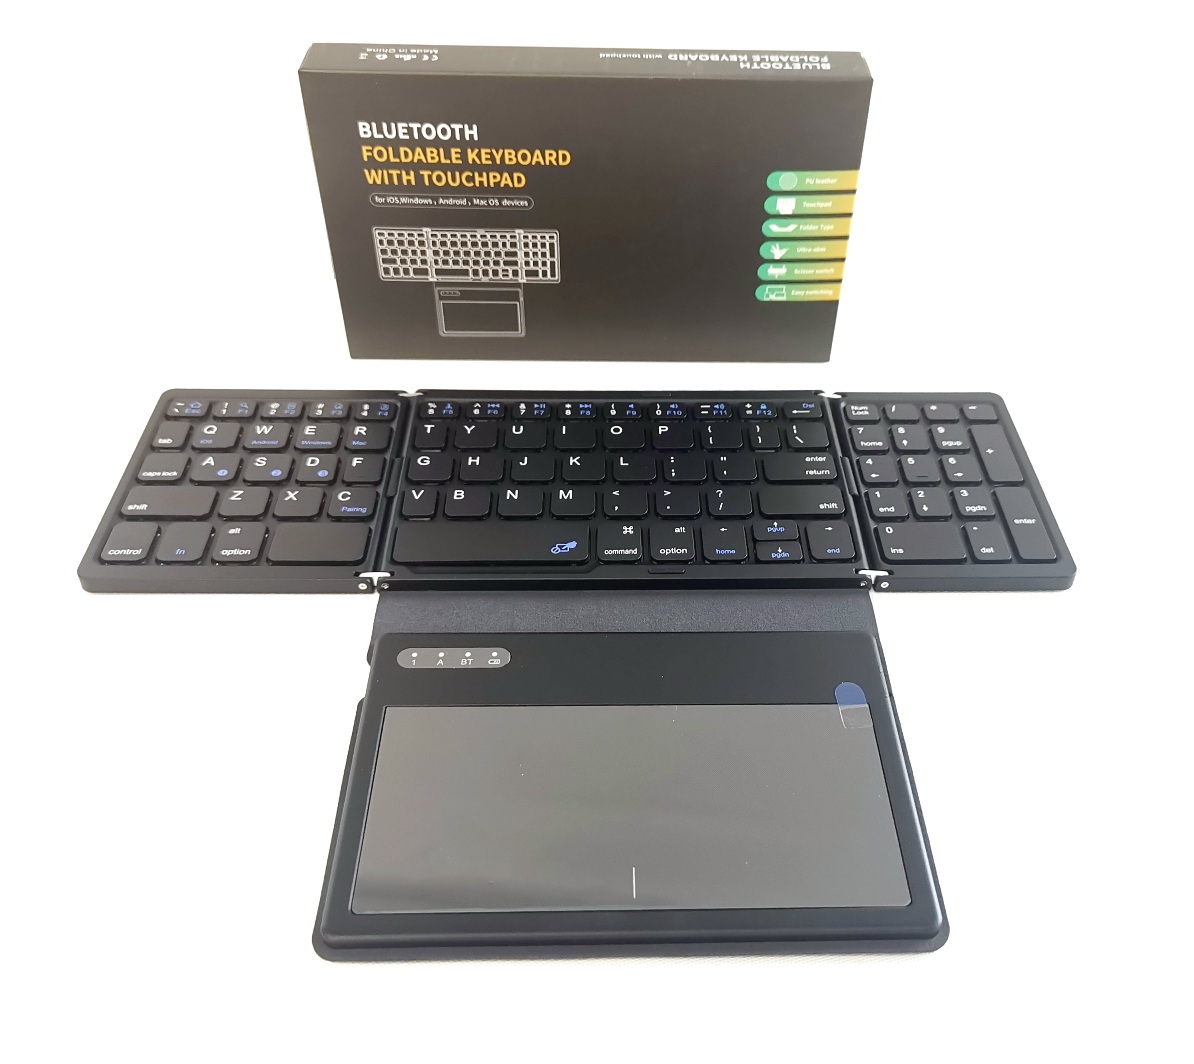 Bluetooth Foldable Keyboard with Touchpad